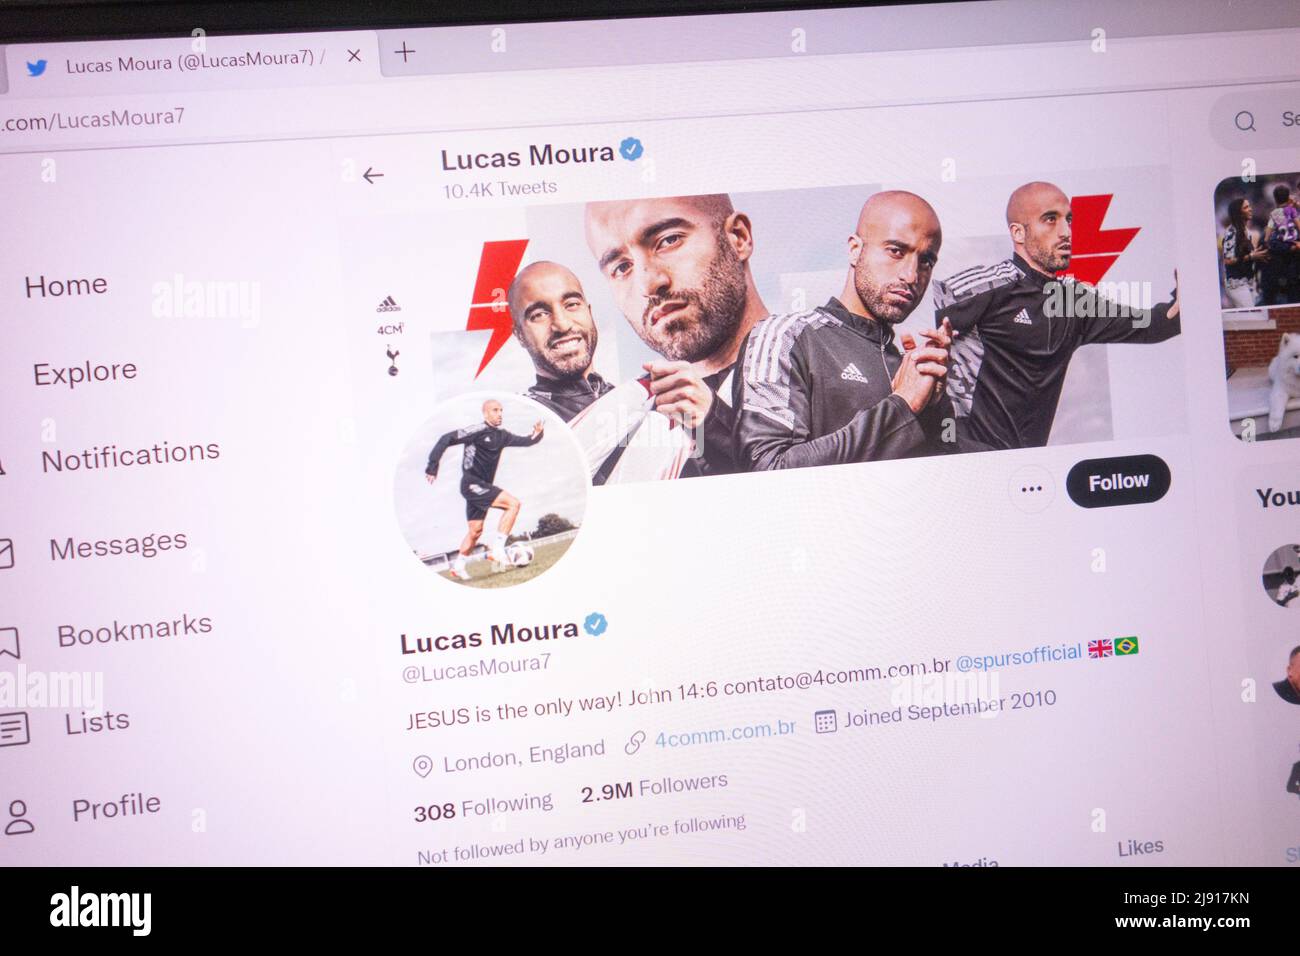 KONSKIE, POLAND - May 18, 2022: Lucas Moura official Twitter account displayed on laptop screen Stock Photo